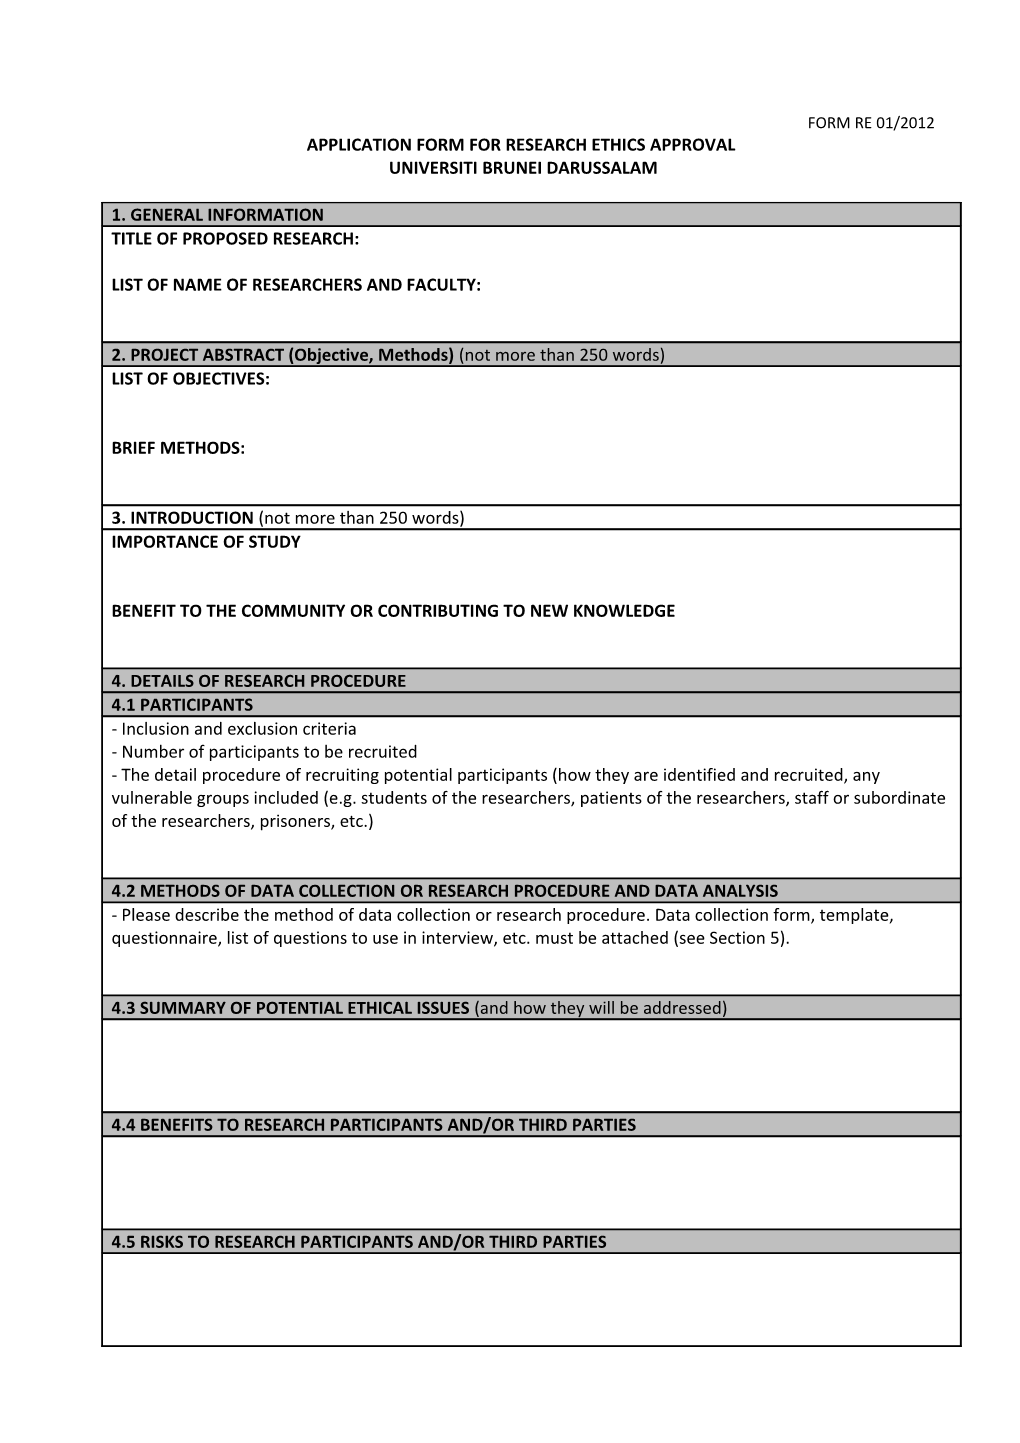 Application Form for Research Ethics Approval